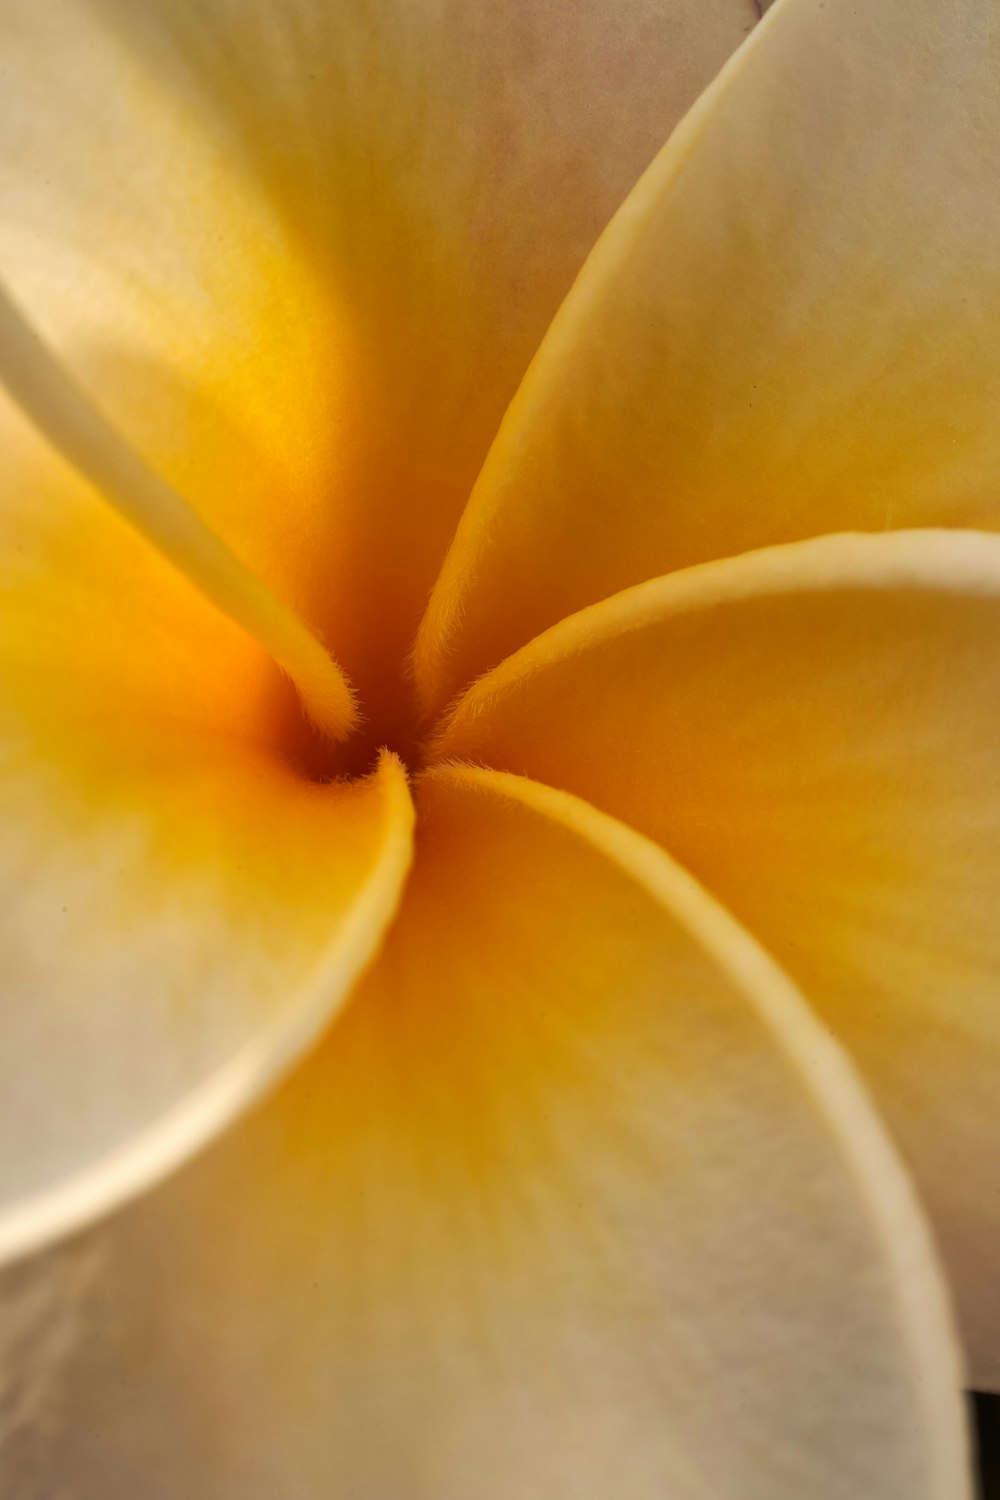 yellow and white flower in close up photography